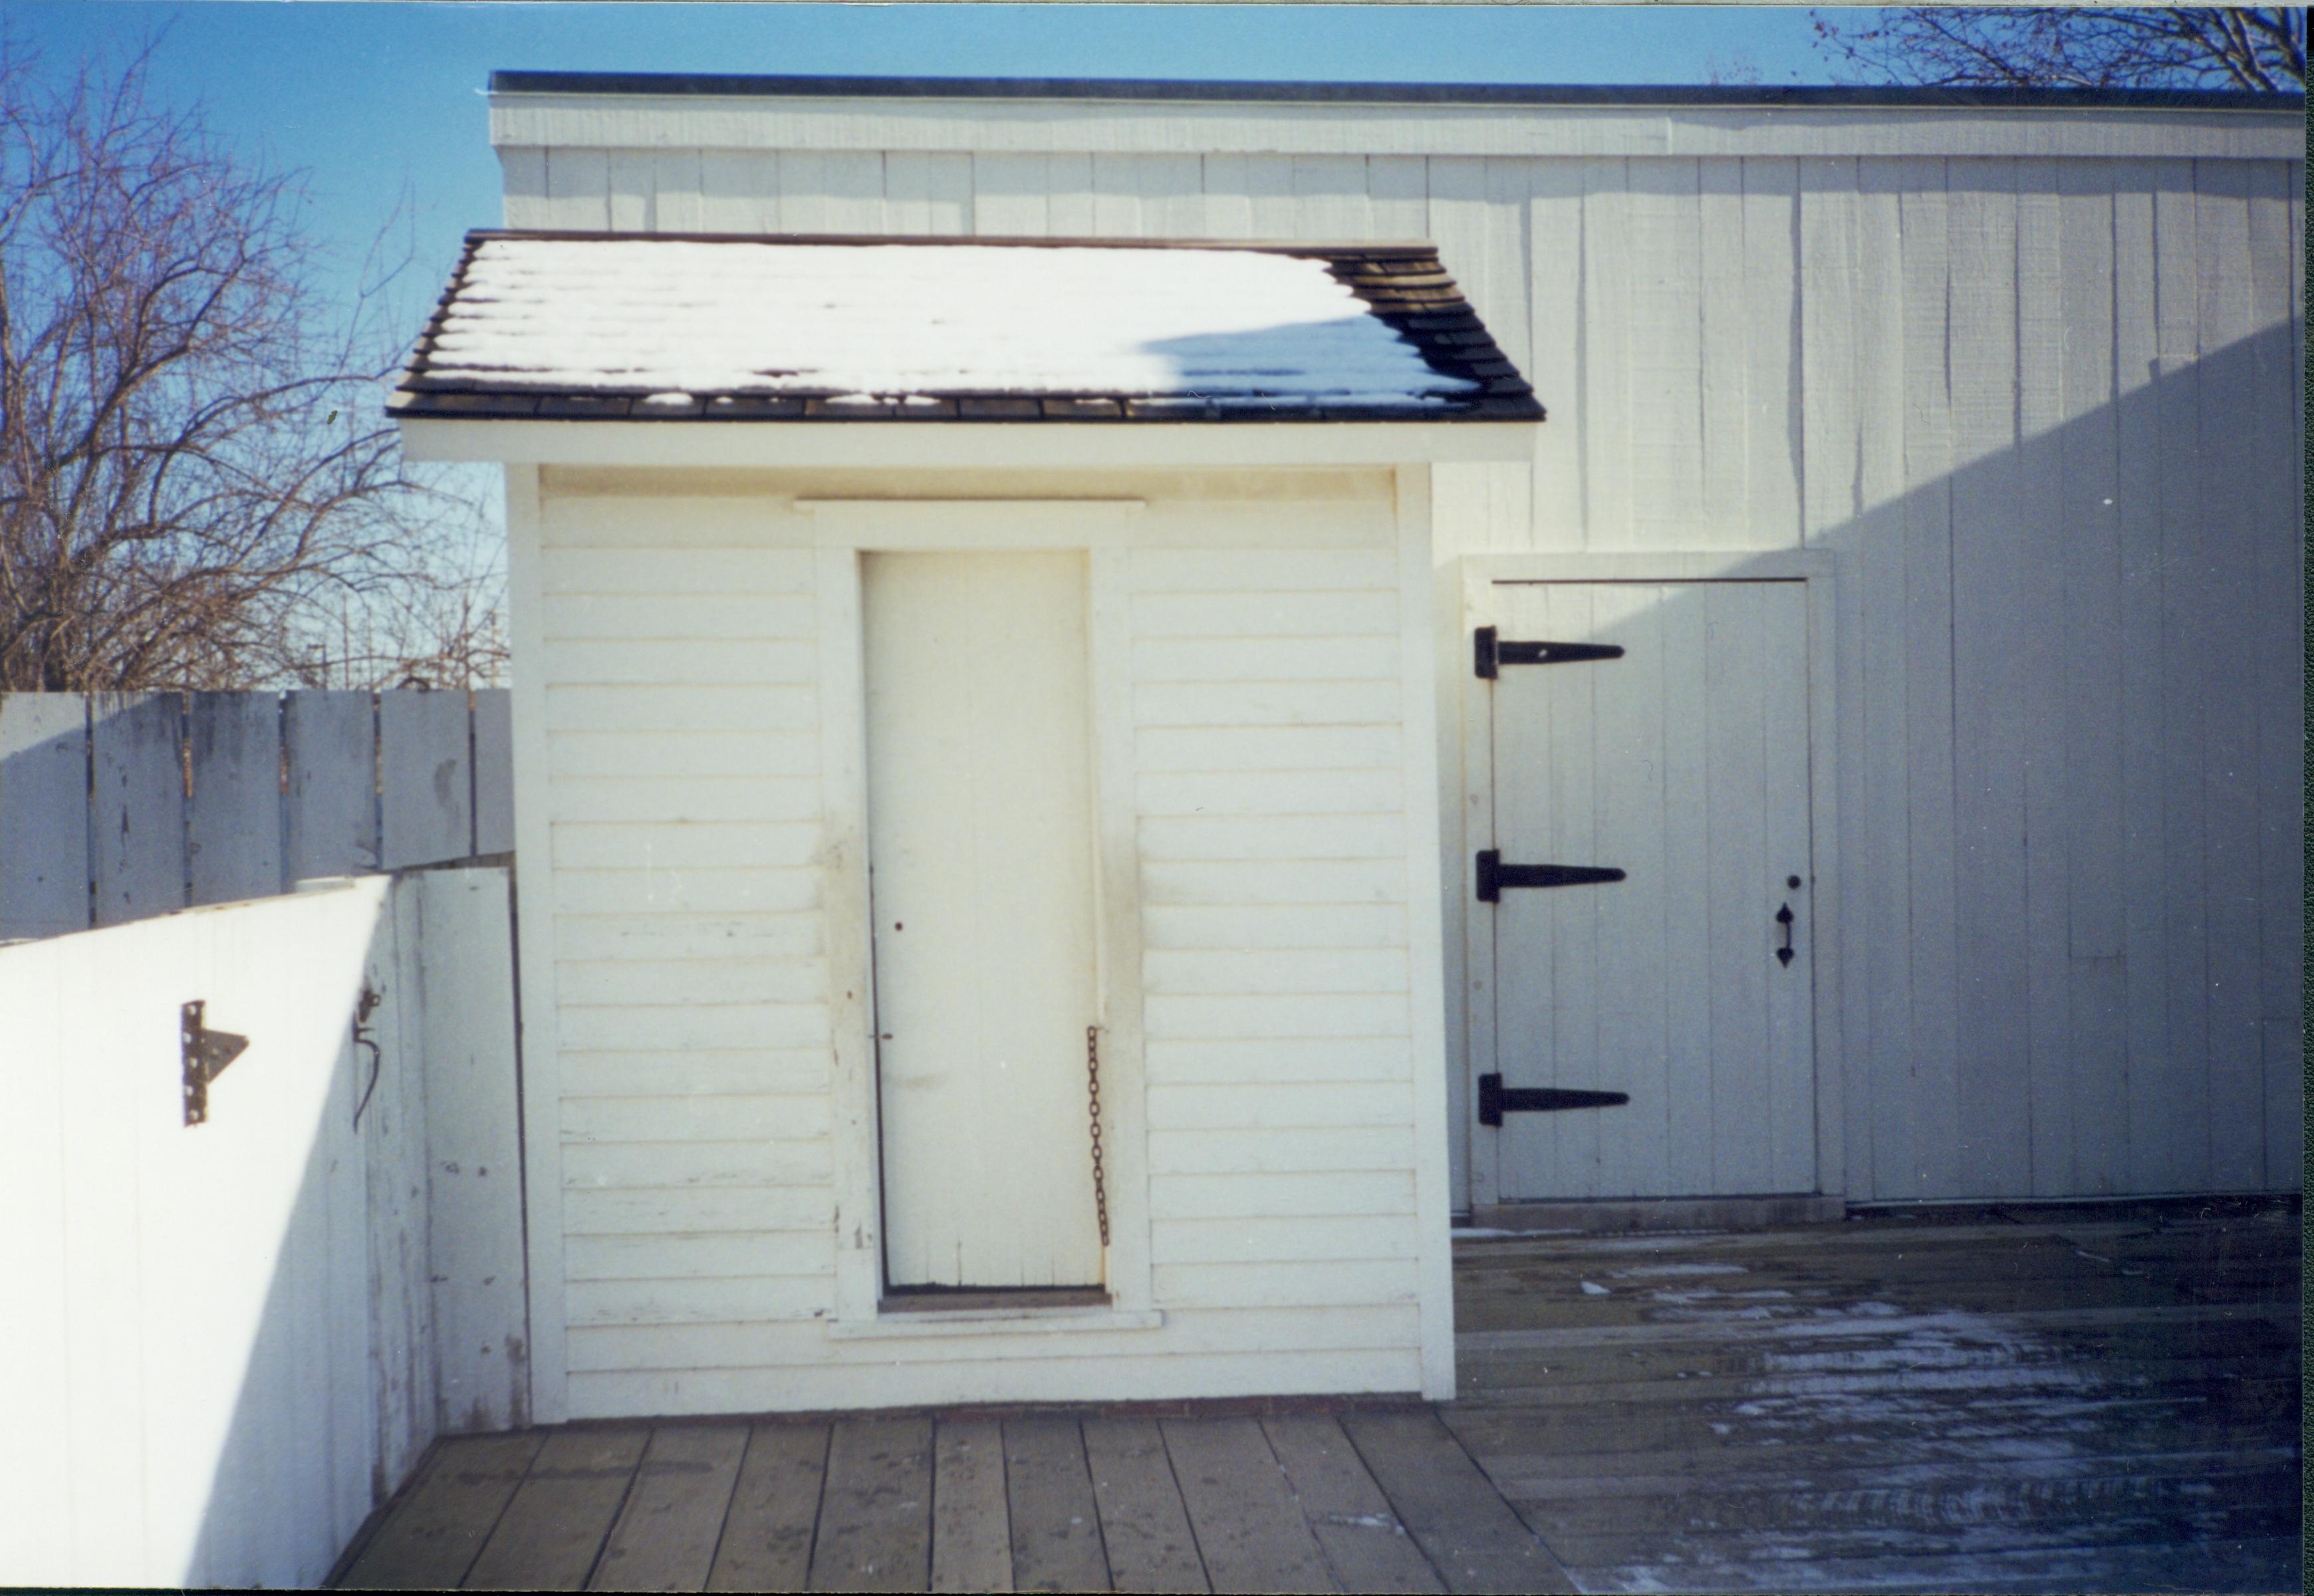 LIHO Privy Research Request Exp.8 Lincoln Home, Privy, Exterior, Snow